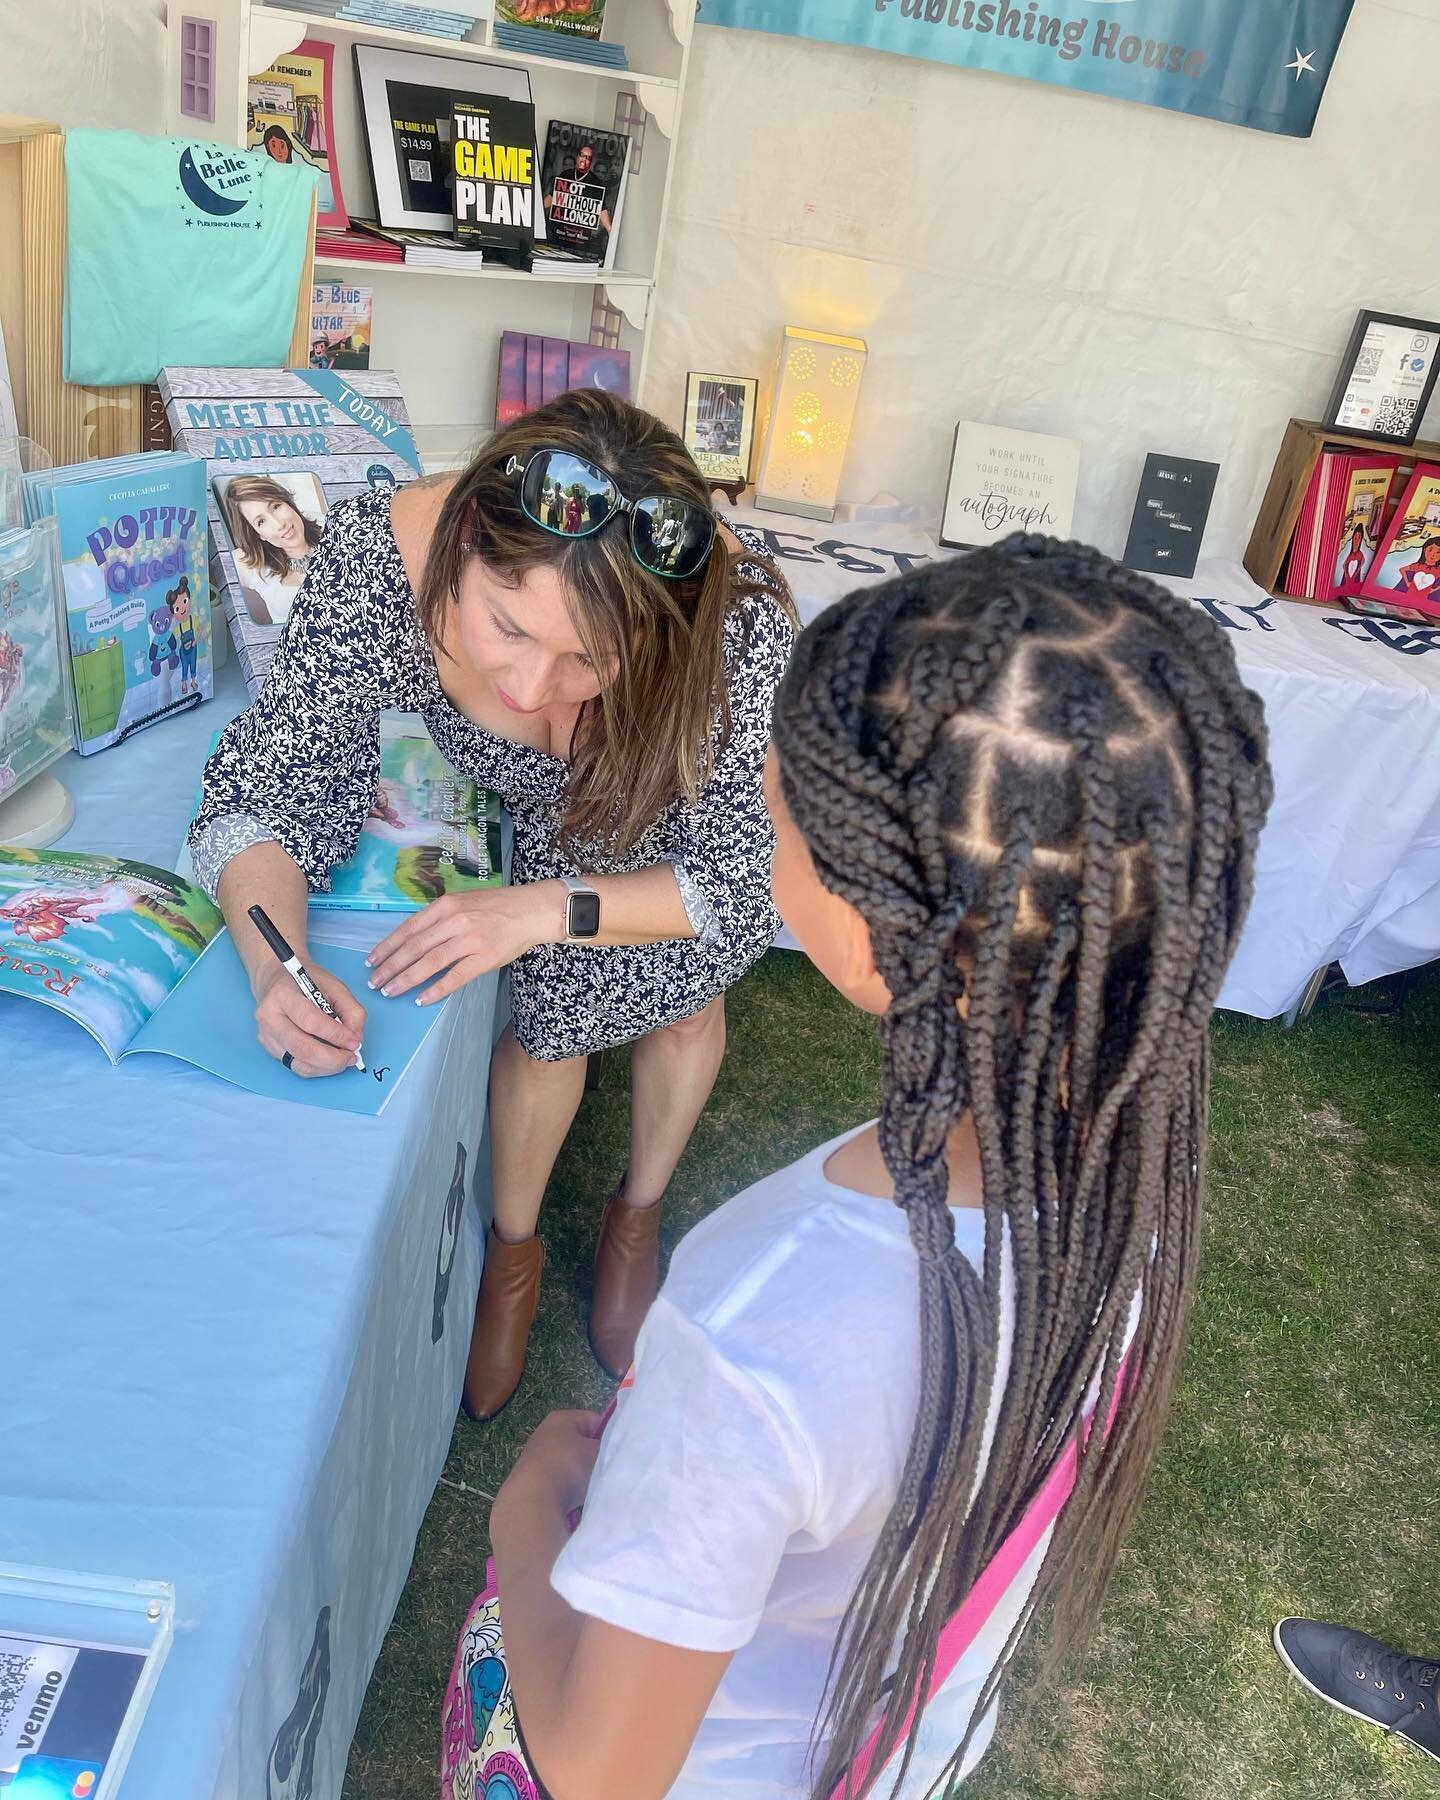 Because &ldquo;readers are leaders&rdquo; 🤓

Thoroughly enjoyed the LA Times Festival of Books today! Because Ava is such a reader, I love that she gets to meet new authors and talk with returning authors about their books. ☺️

@latimesfob, us book 